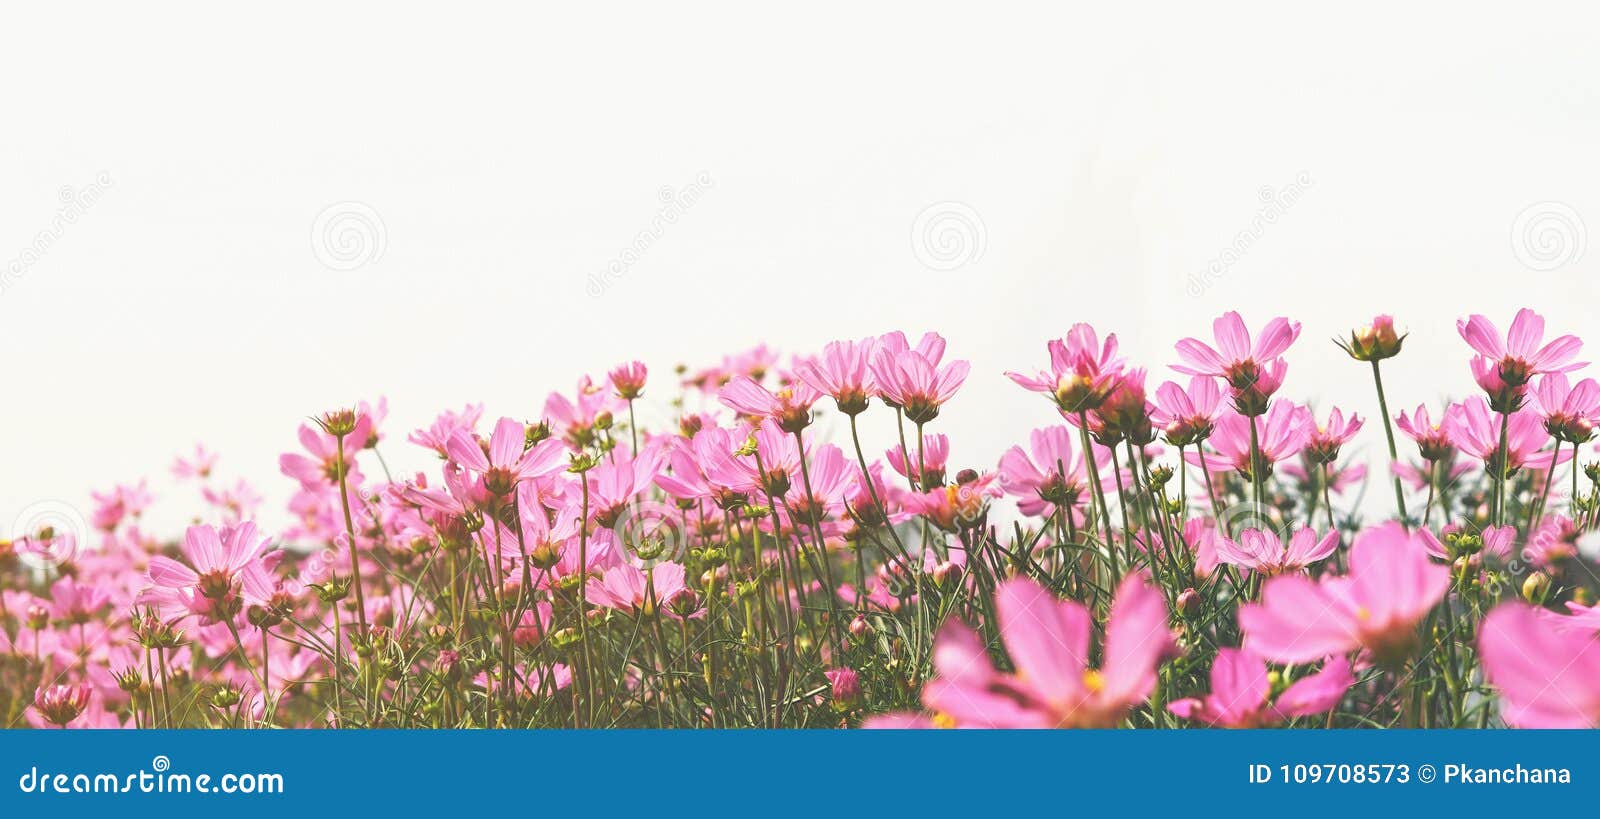 Pink cosmos flower in the meadow over white background.